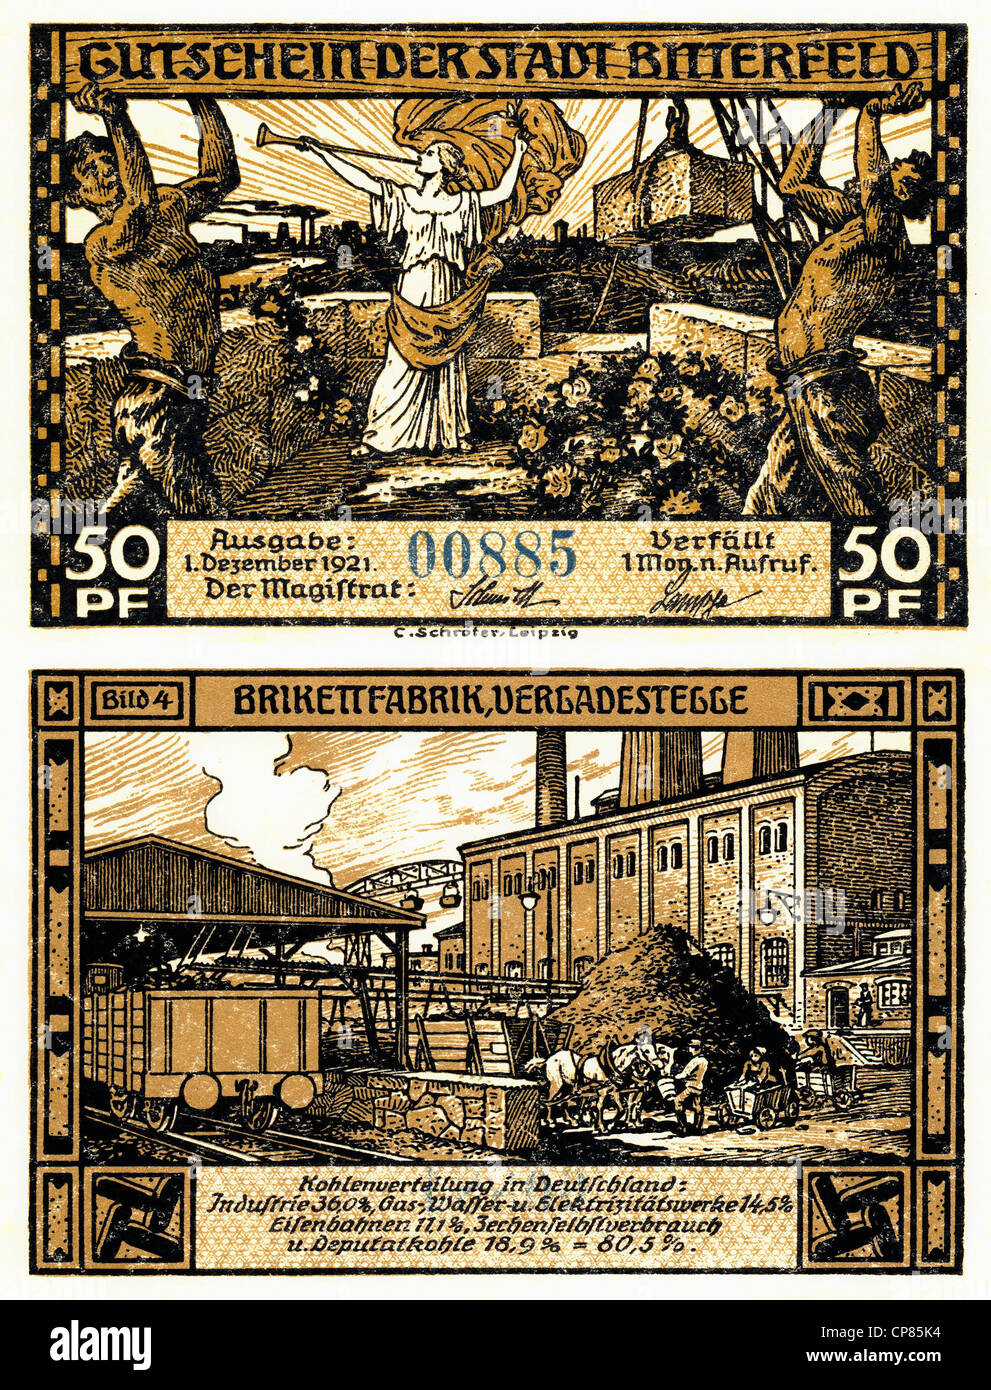 Emergency currency, banknote, front and back side, image of a briquetting plant and of the distribution of coal, Germany, Europe Stock Photo